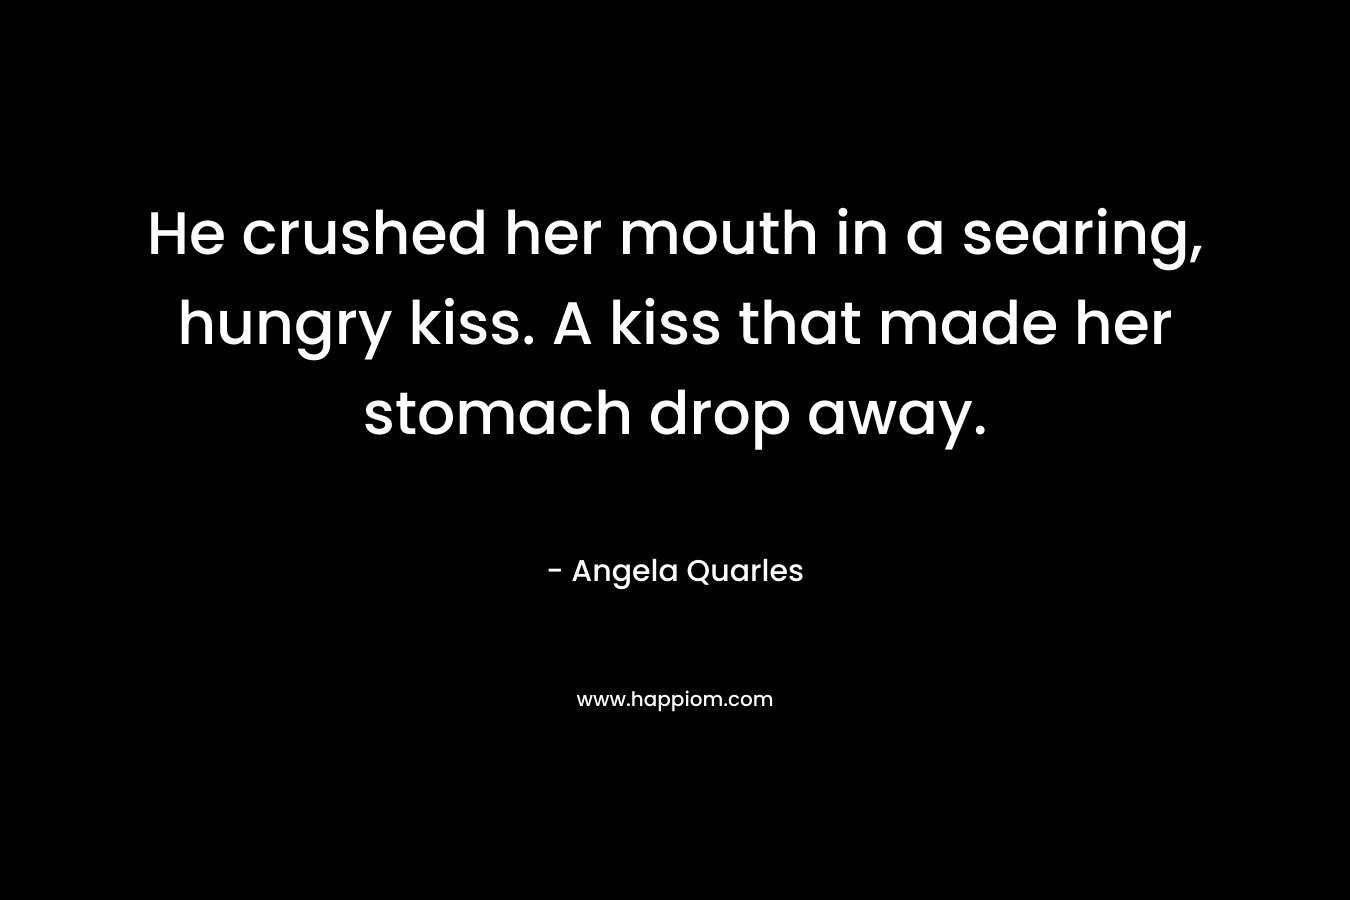 He crushed her mouth in a searing, hungry kiss. A kiss that made her stomach drop away.